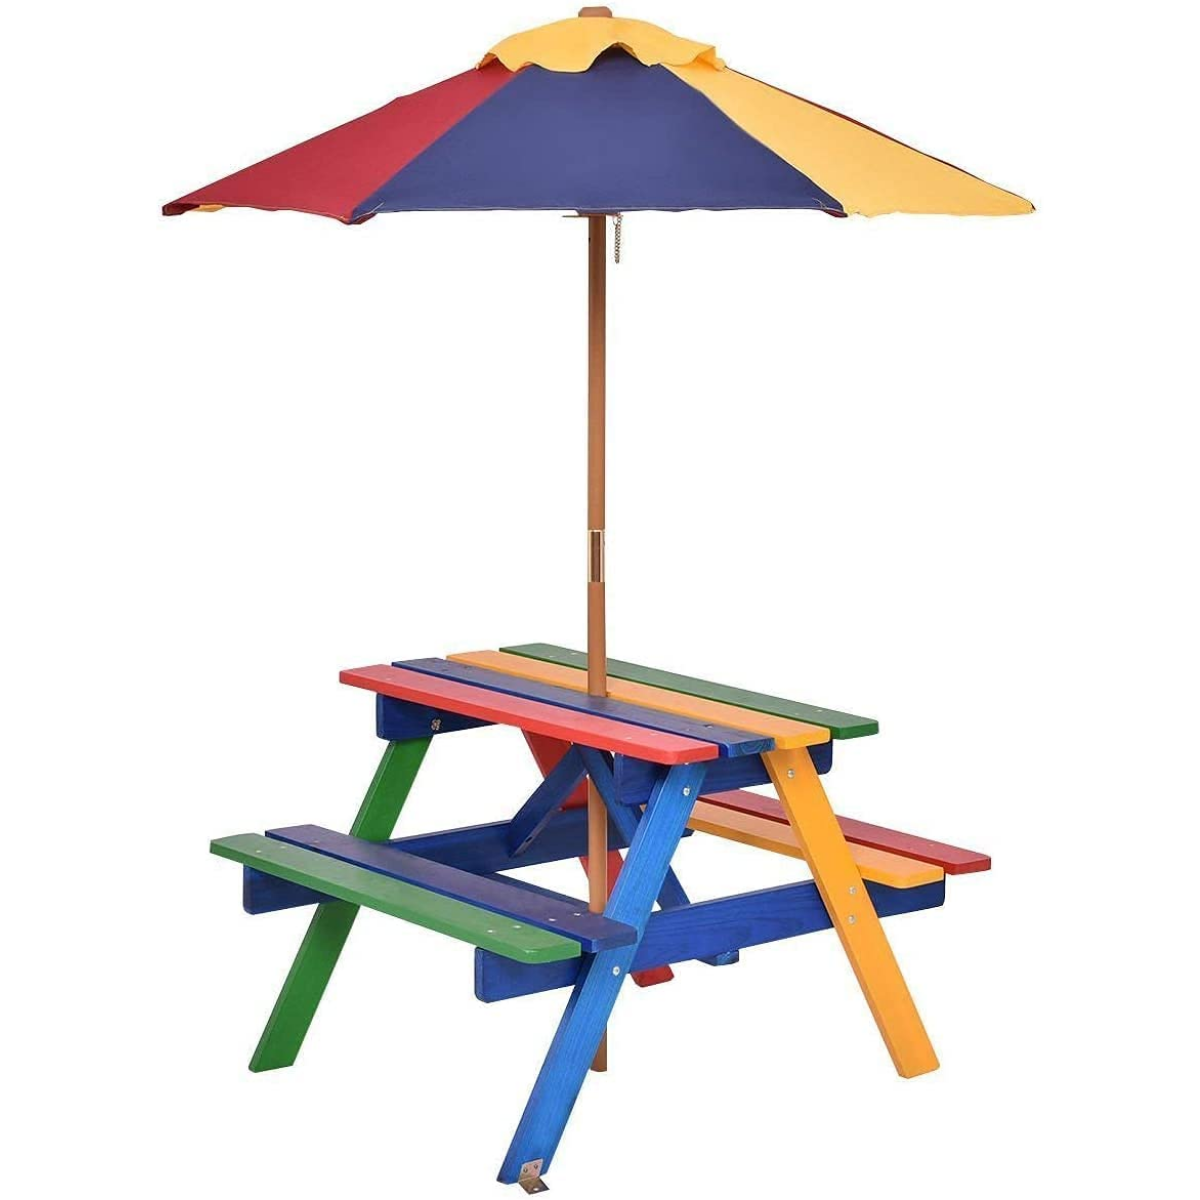 Children's Wooden Picnic Bench with Parasol